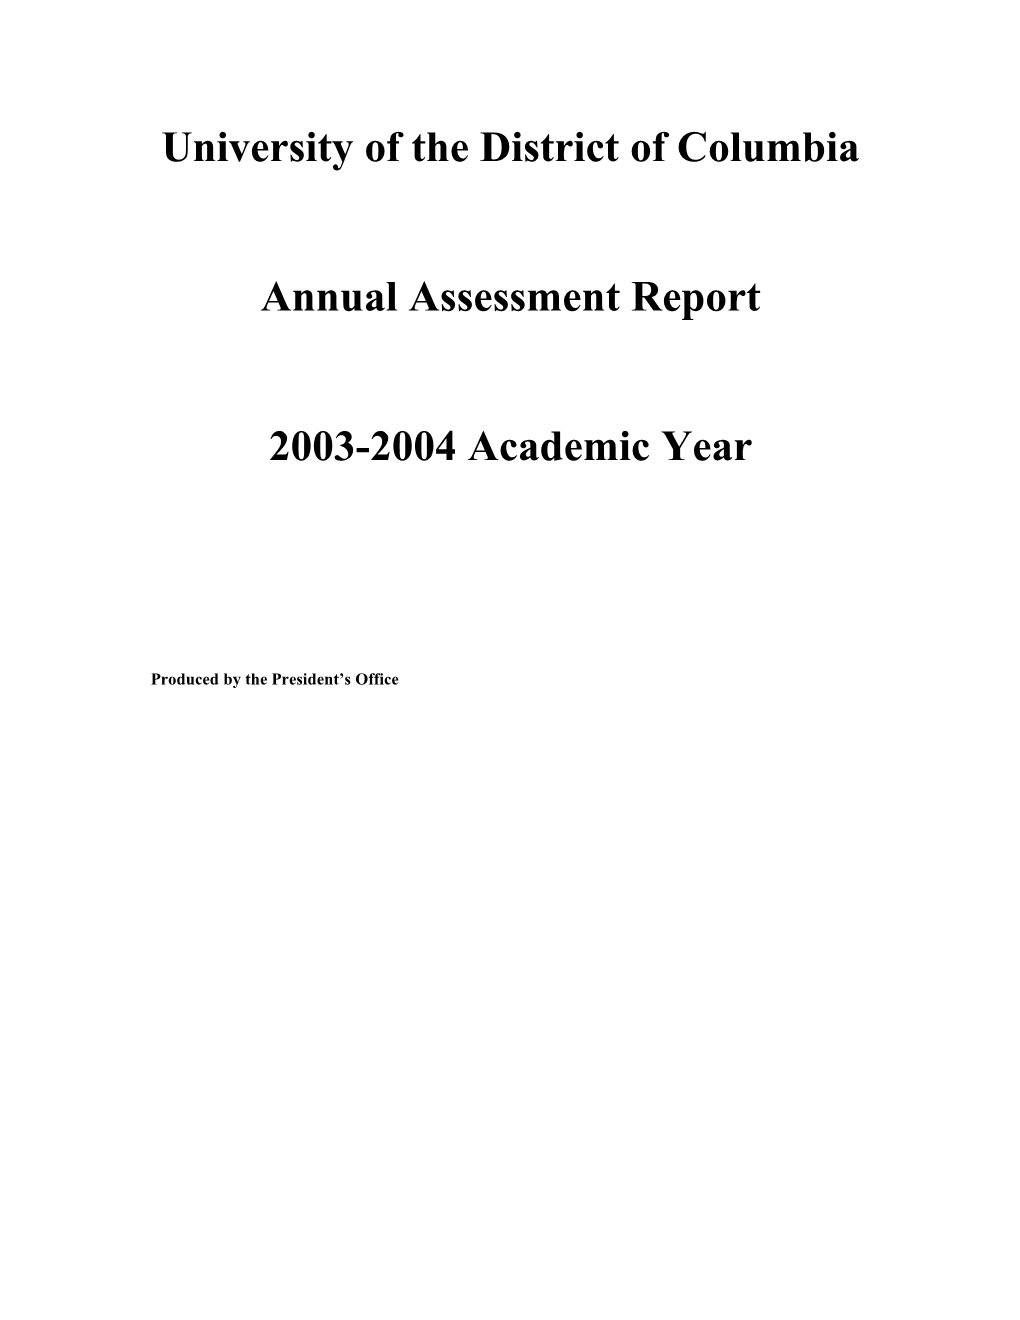 University of the District of Columbia s1